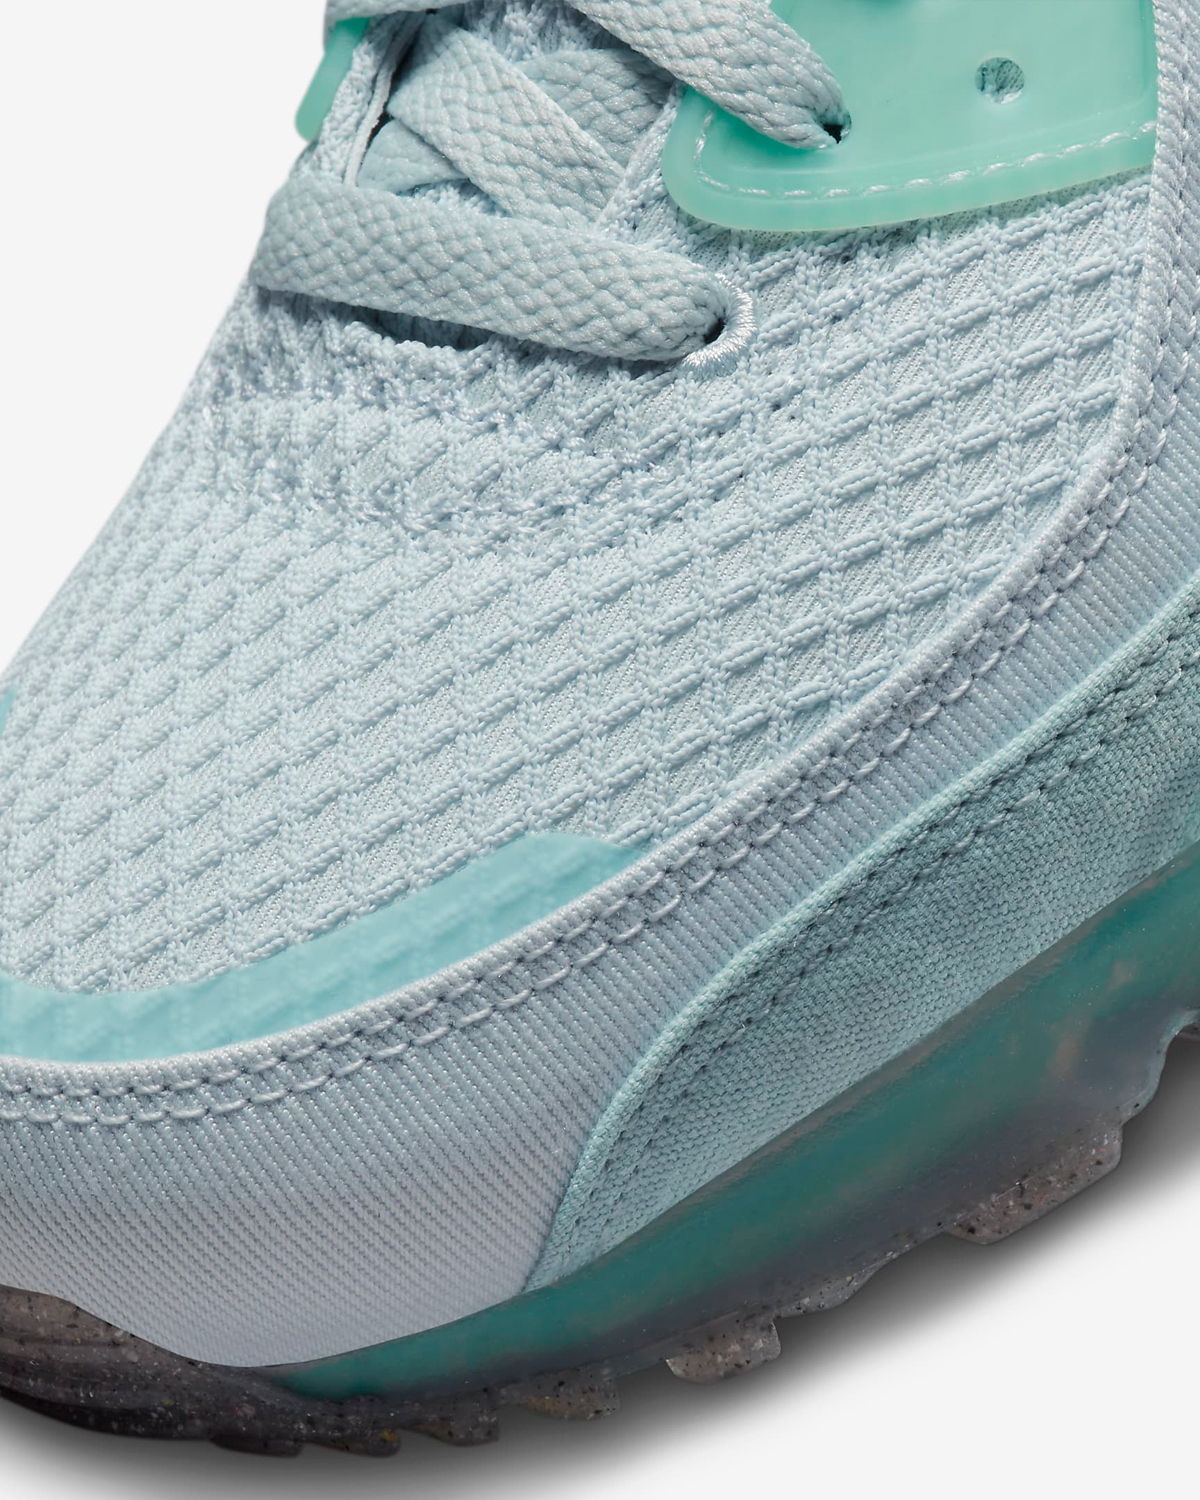 nike-air-max-terrascape-90-aura-ocean-cube-washed-teal-release-date-7